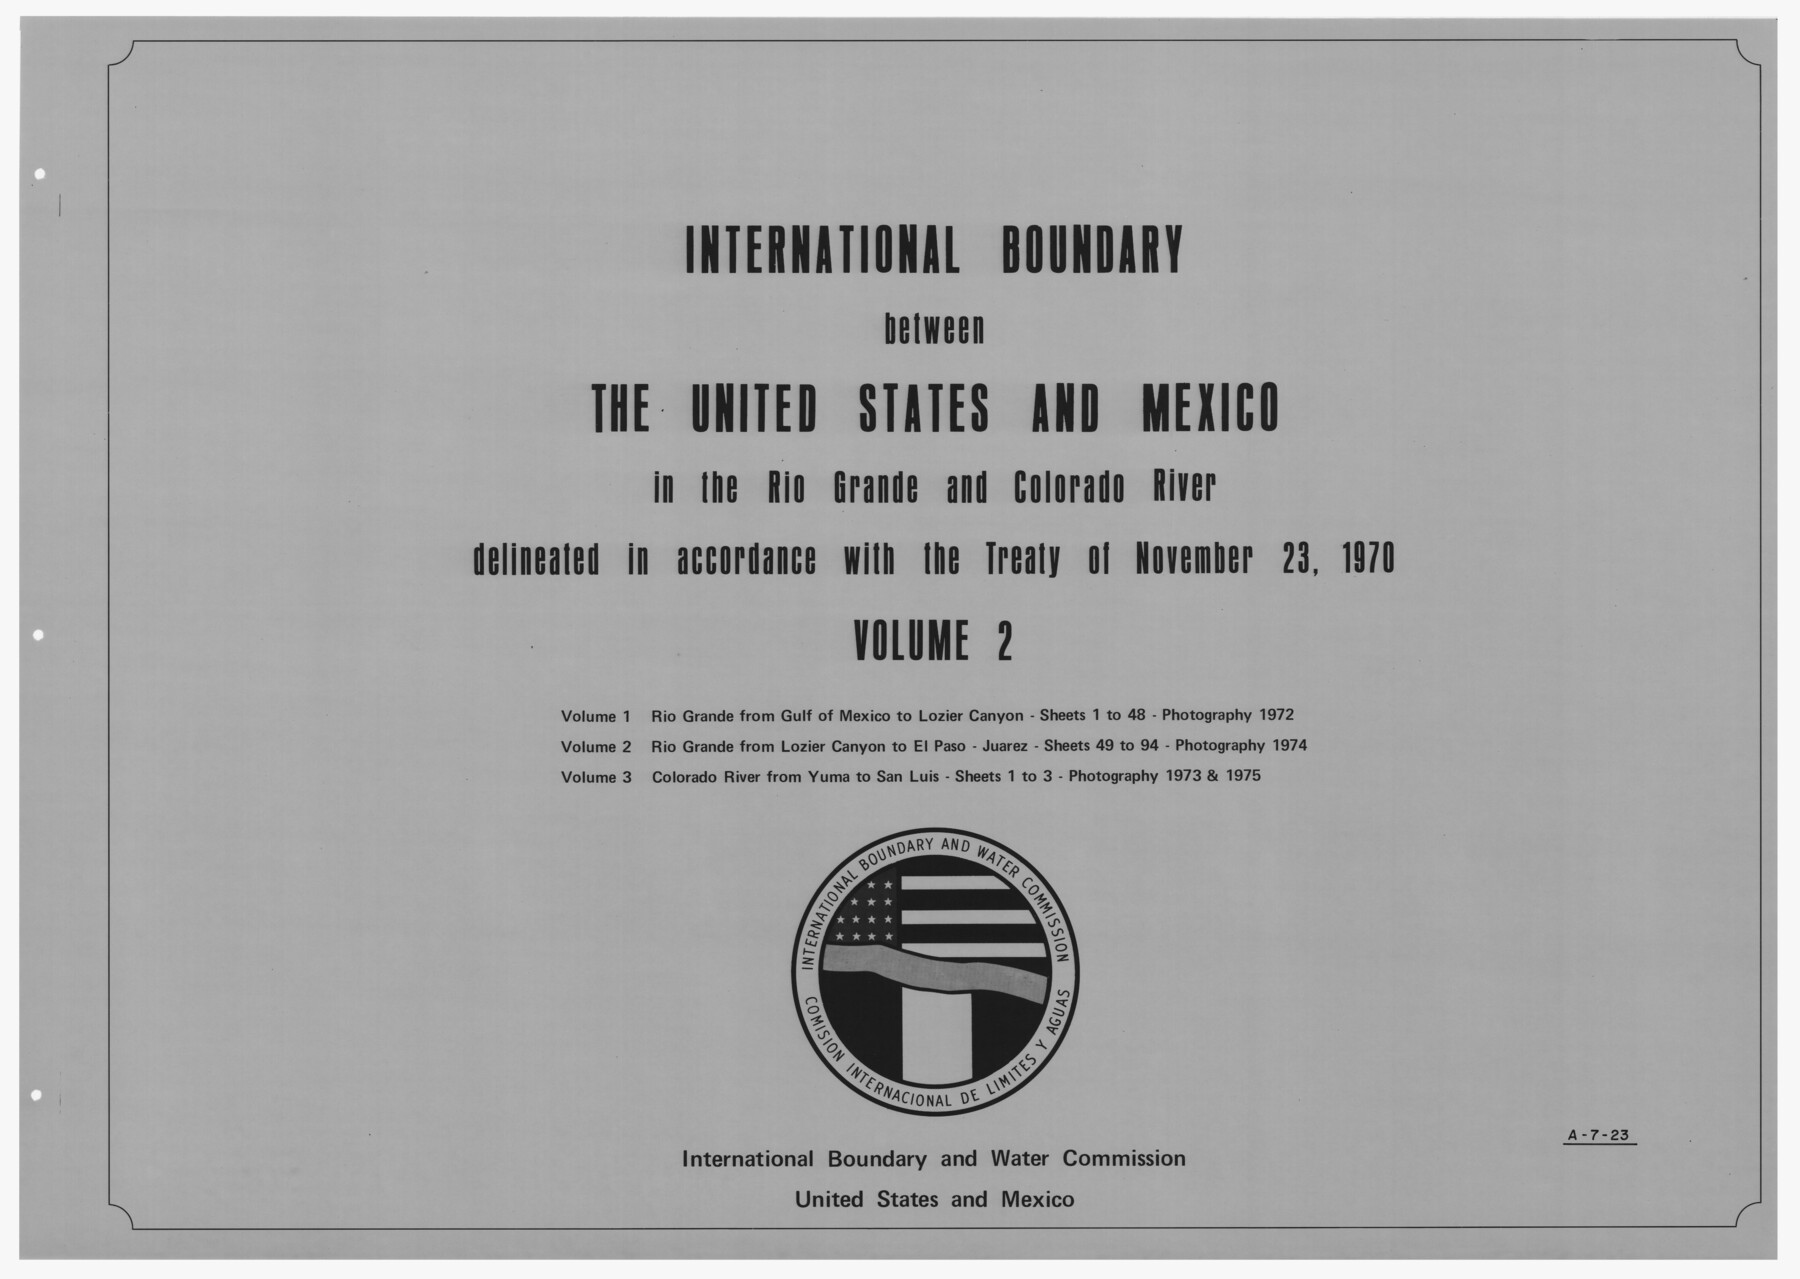 7641, International boundary between the United States and Mexico in the Rio Grande and Colorado River delineated in accordance with the Treaty of November 23, 1970 - Volume 2